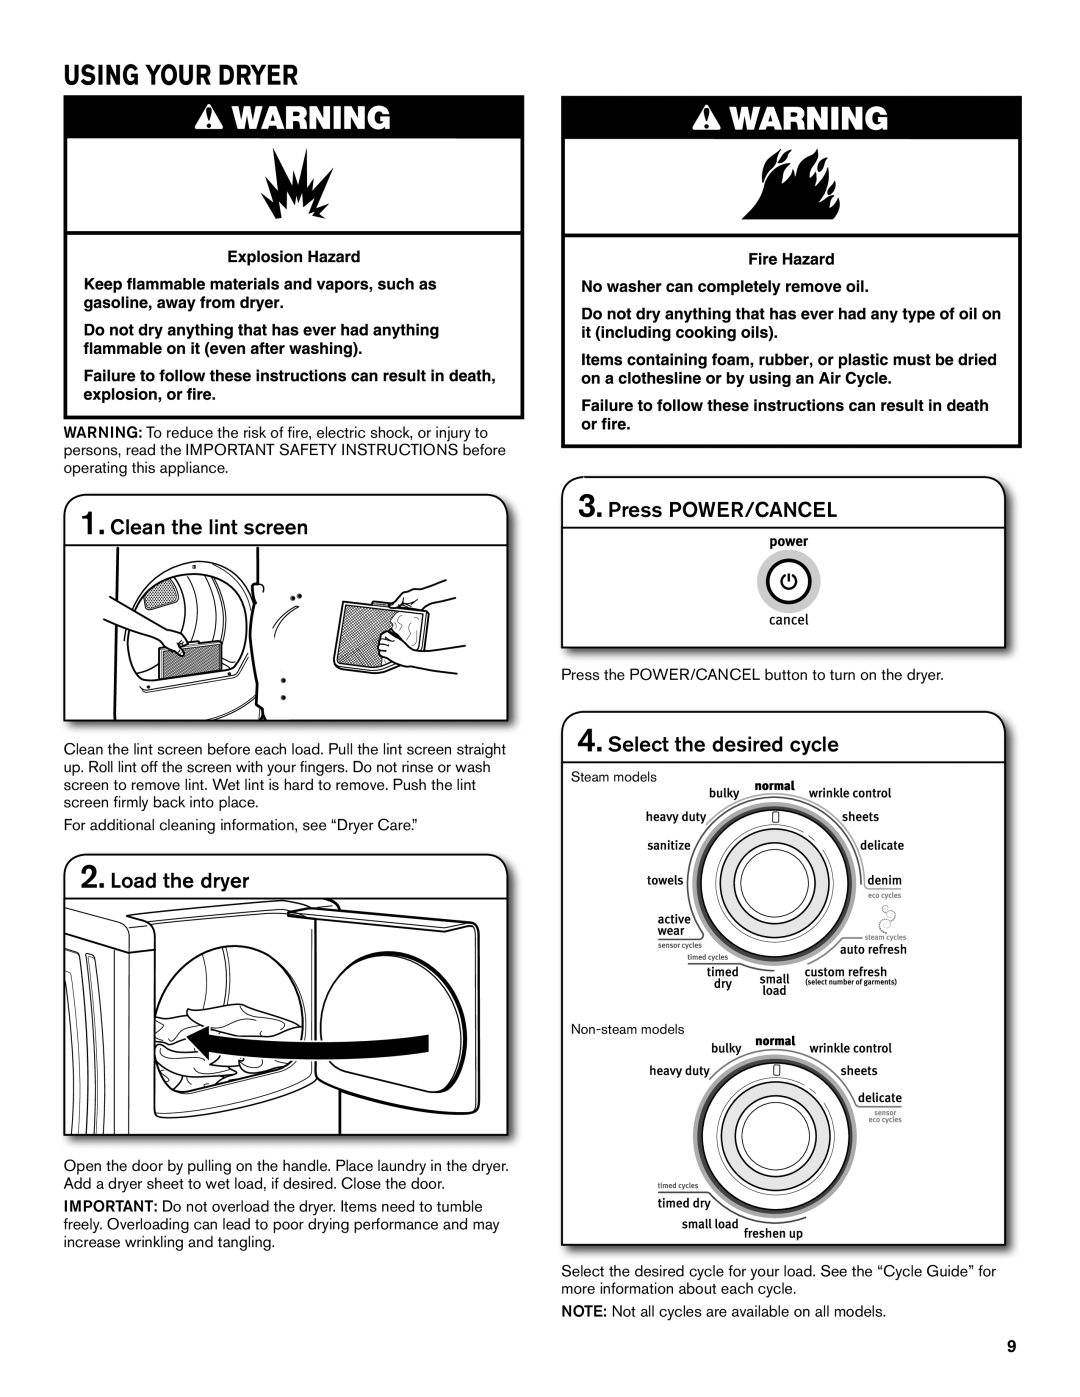 Maytag W105623334C Using Your Dryer, Clean the lint screen, Load the dryer, Press POWER/CANCEL, Select the desired cycle 